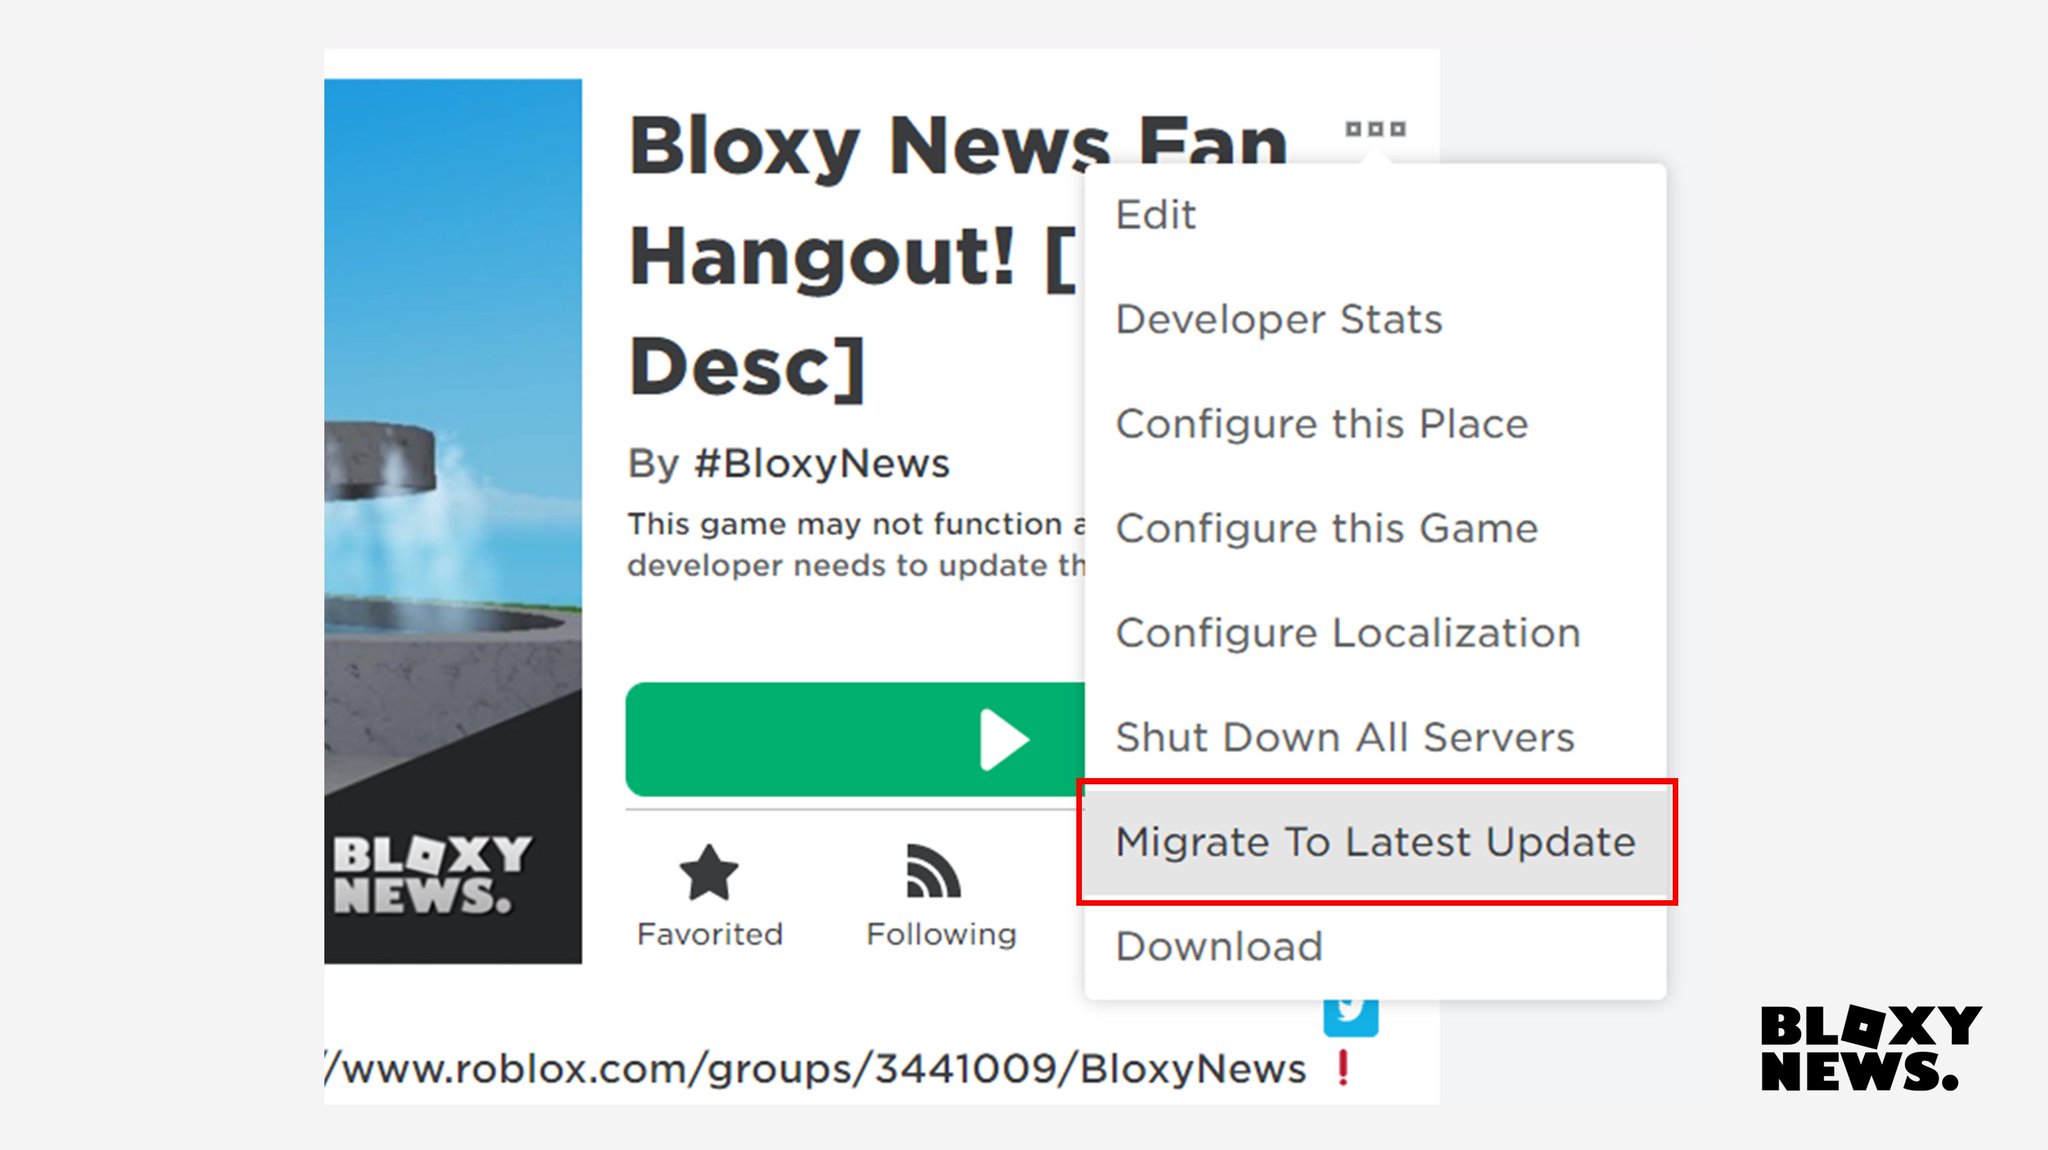 Bloxy News on X: #BloxyNews  There seems to be a new Emote Menu coming  soon to #Roblox games (located at bottom left -- may change before  release)! This will allow you